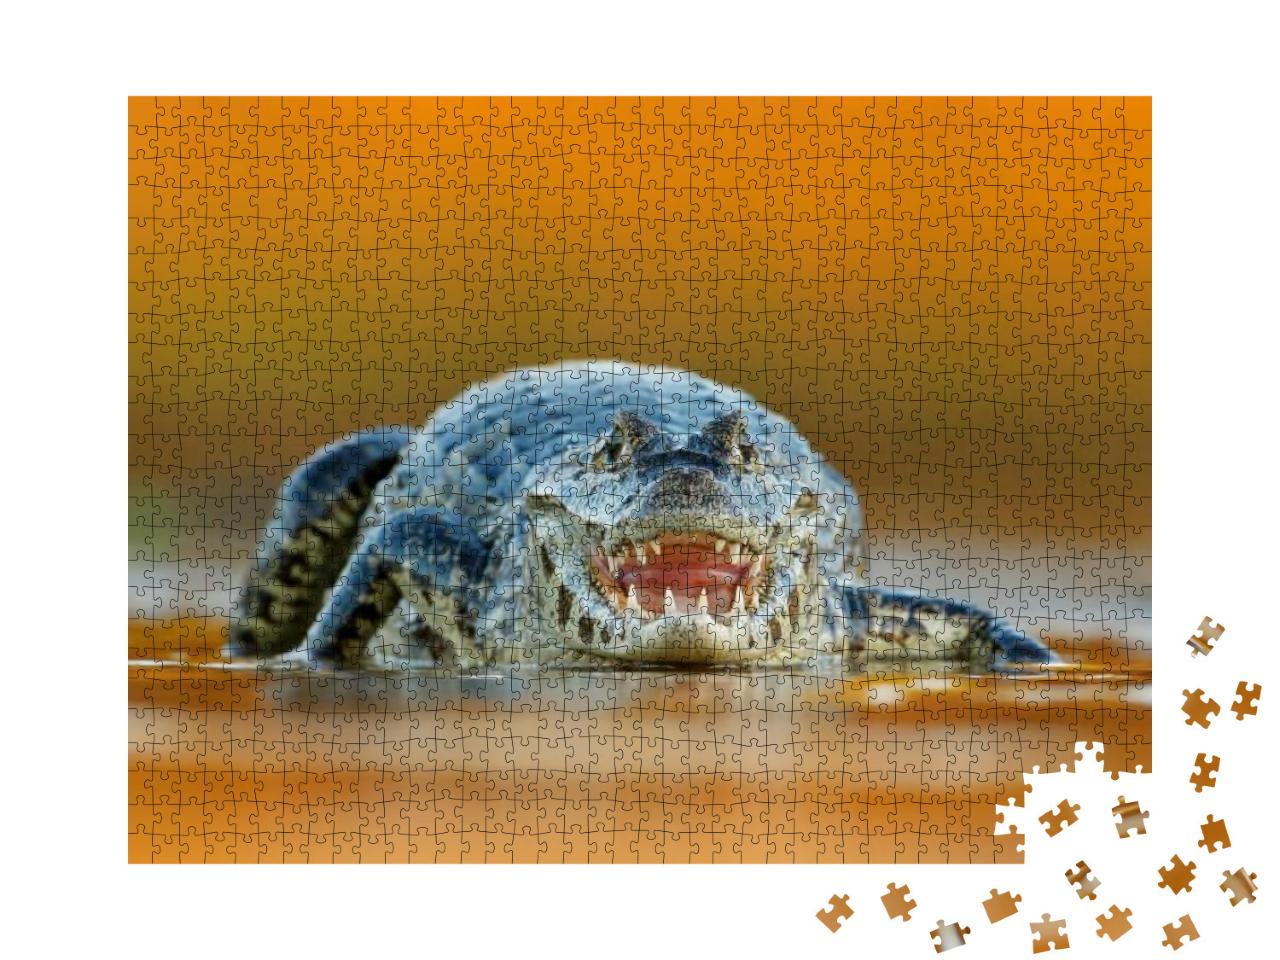 Yacare Caiman, Crocodile with Open Muzzle with Big Teeth... Jigsaw Puzzle with 1000 pieces